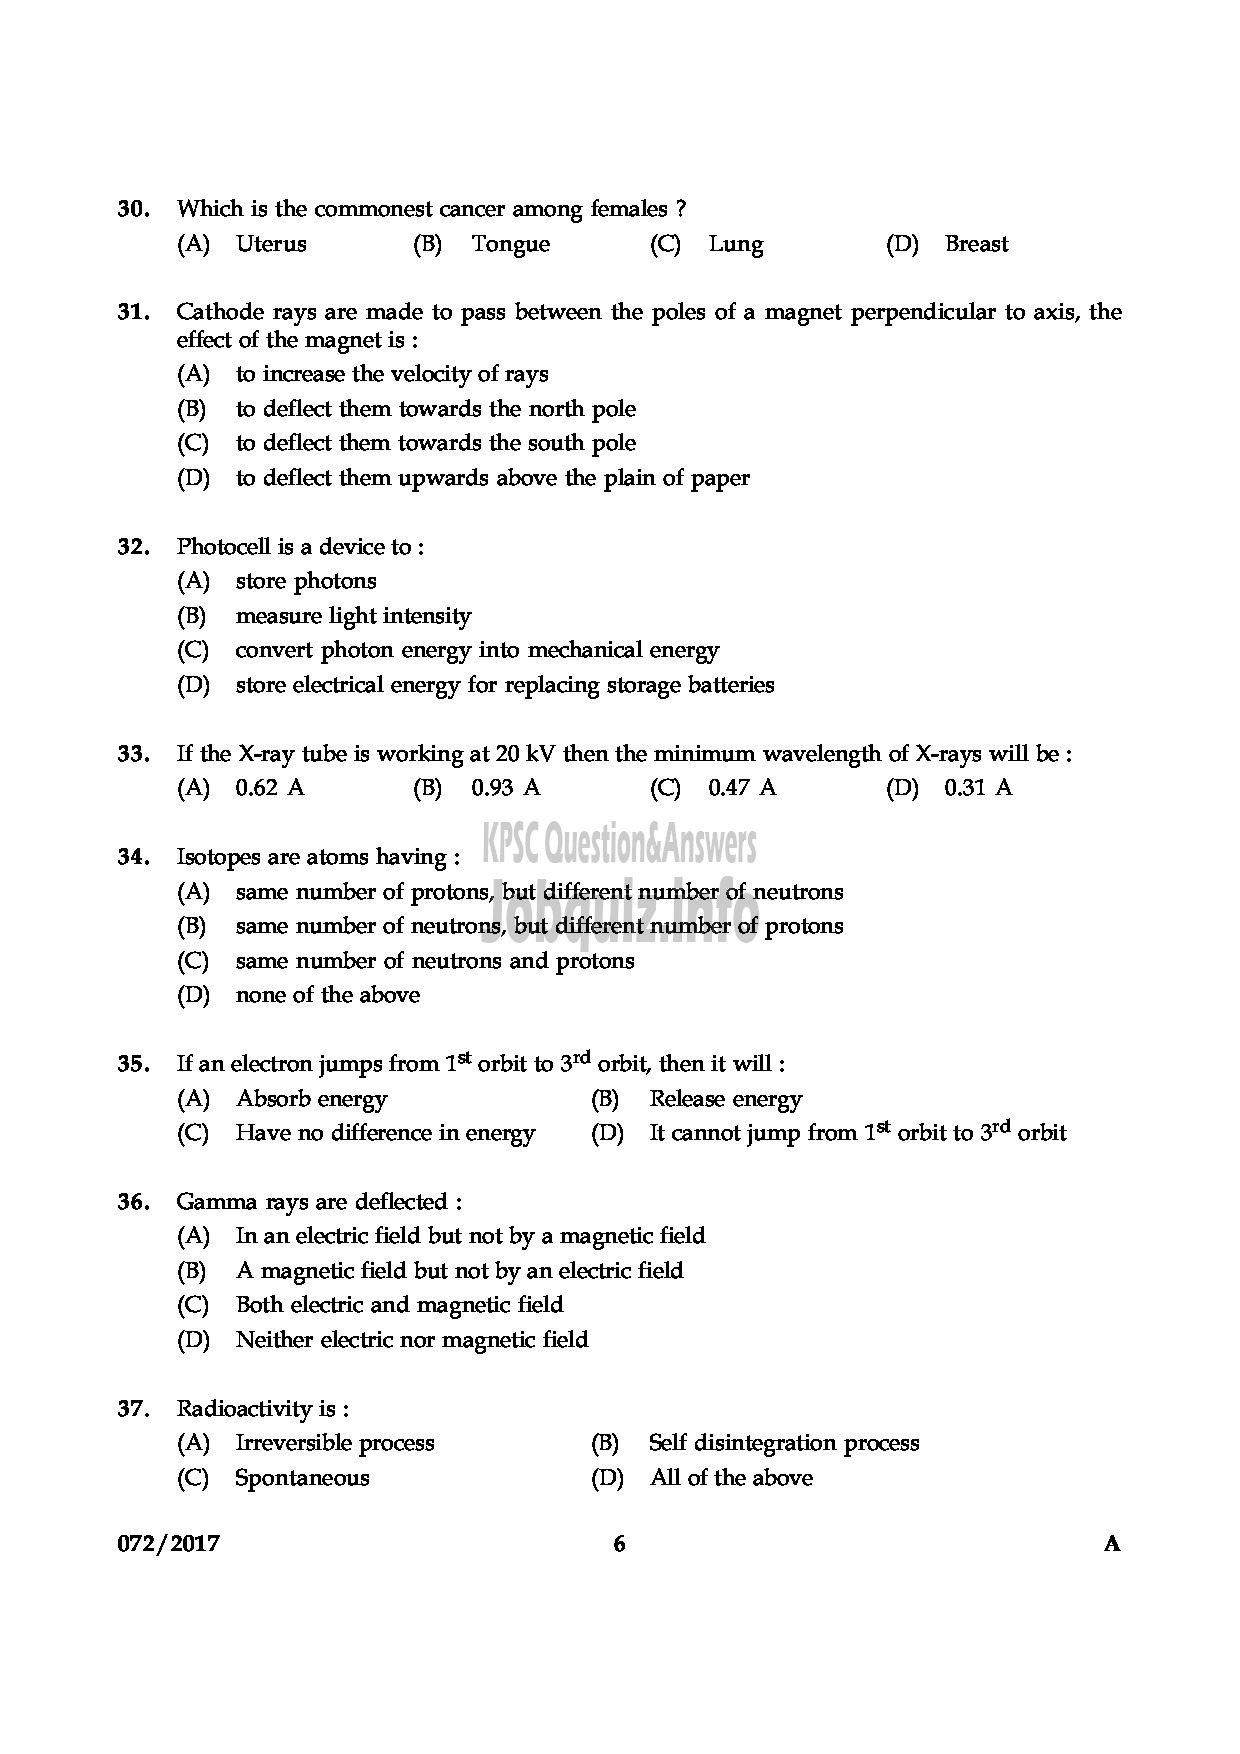 Kerala PSC Question Paper - RADIOGRAPHER GR.II HEALTH SERVICES QUESTION PAPER-5